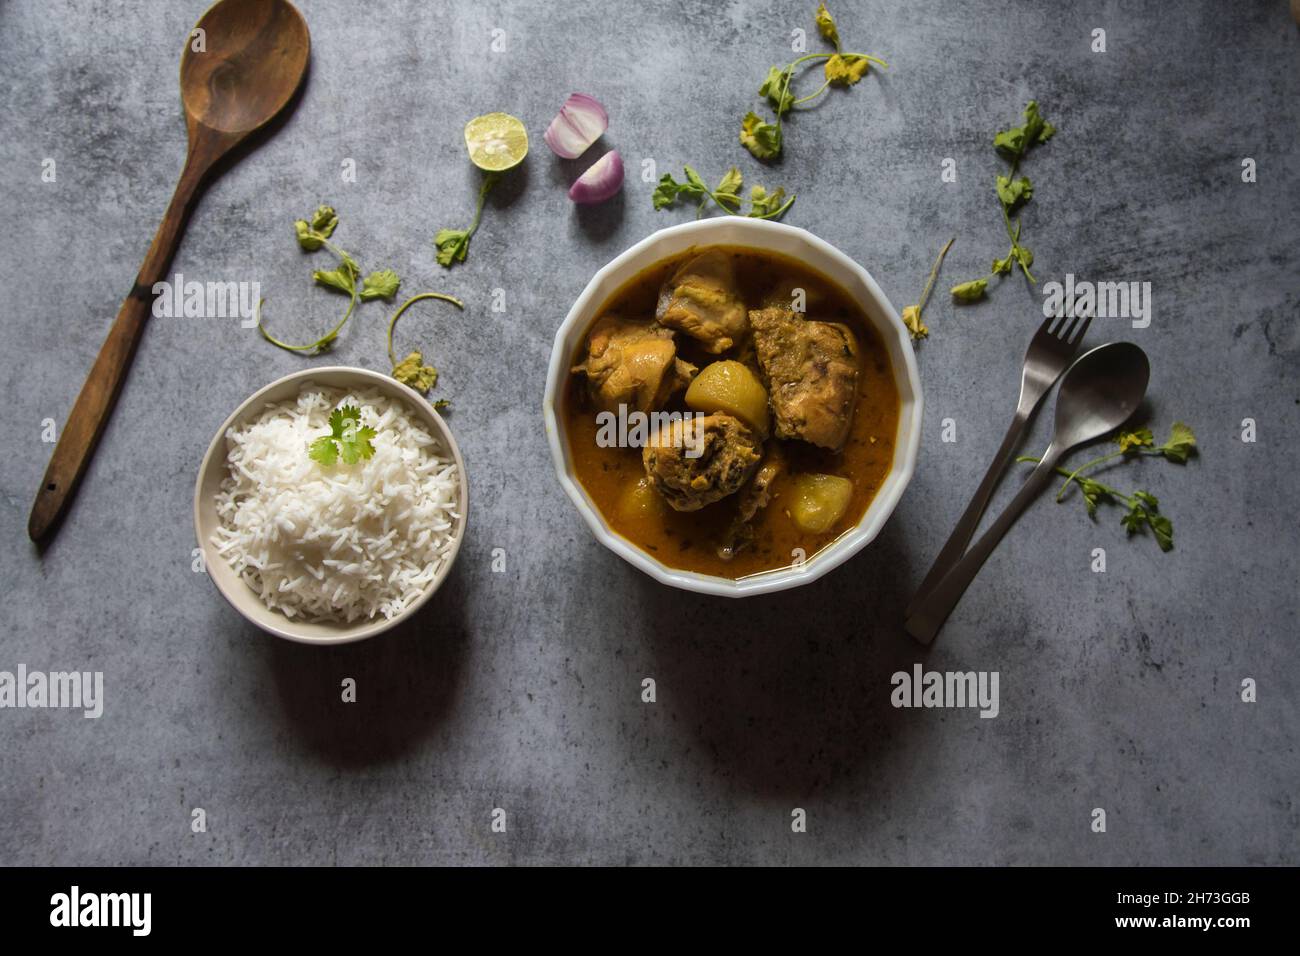 https://c8.alamy.com/comp/2H73GGB/popular-indian-meal-rice-and-chicken-gravy-top-view-2H73GGB.jpg